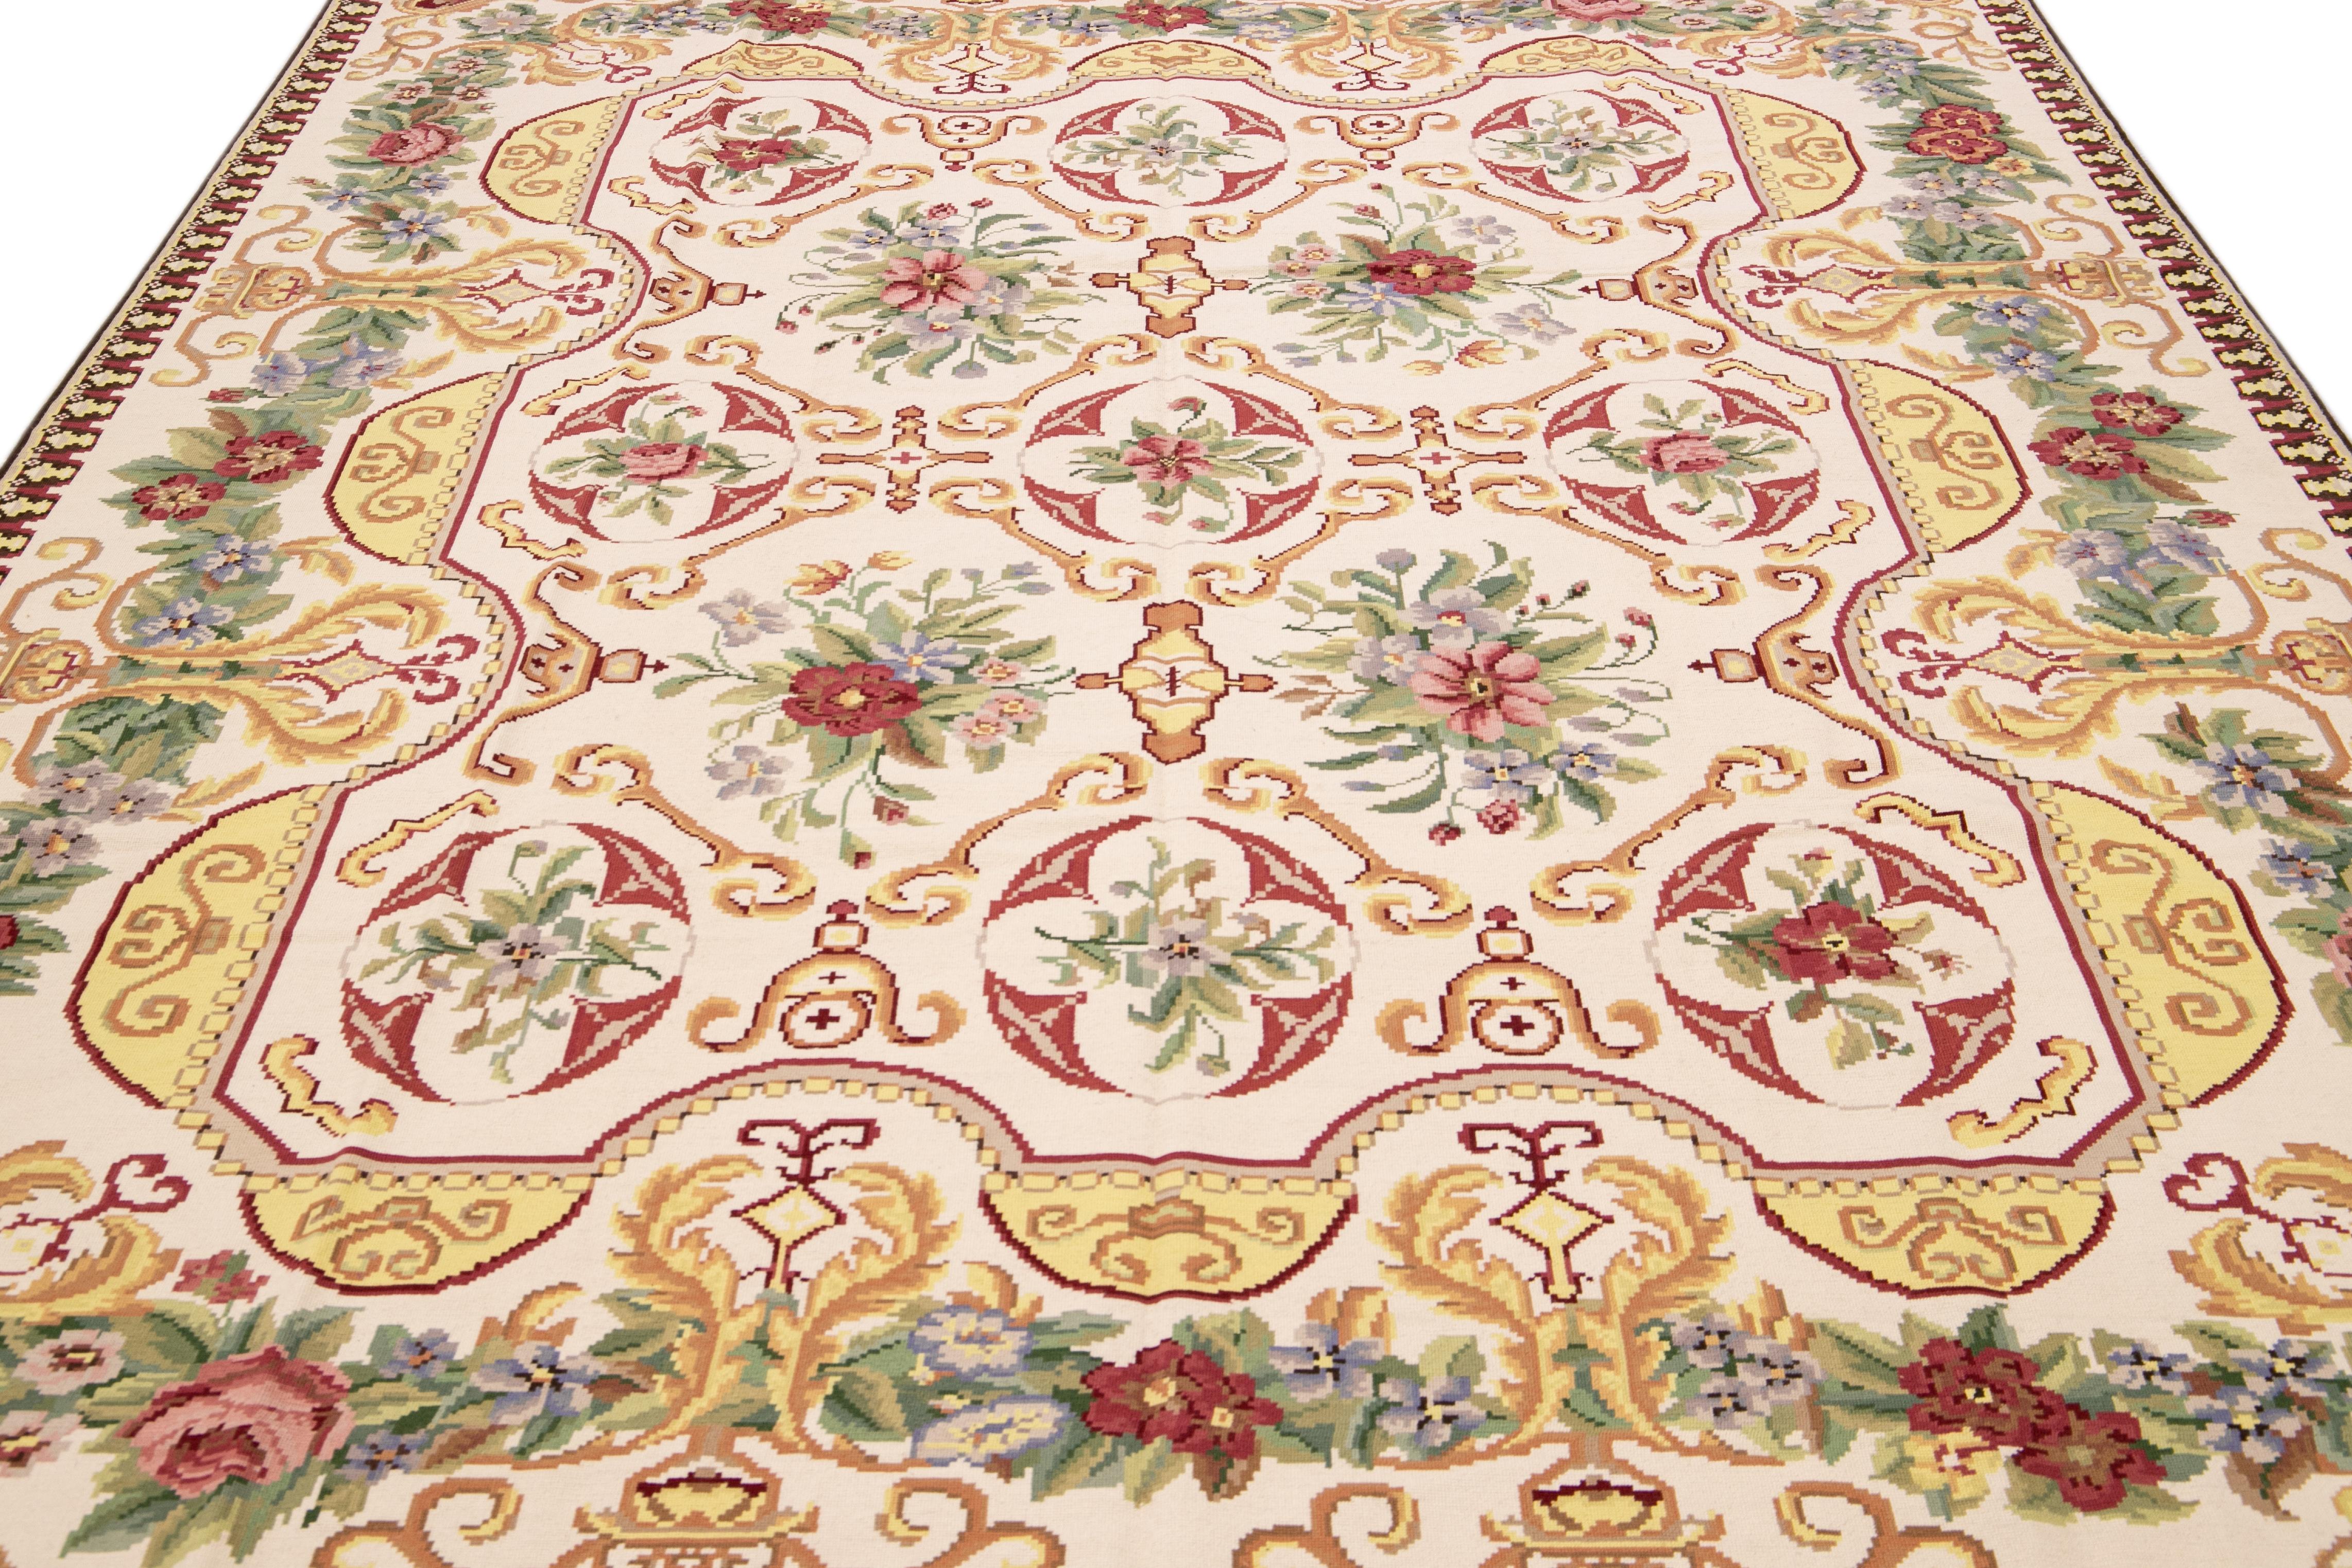 French Provincial Vintage Aubusson Style Needlepoint Floral Pattern Ivory Wool Rug